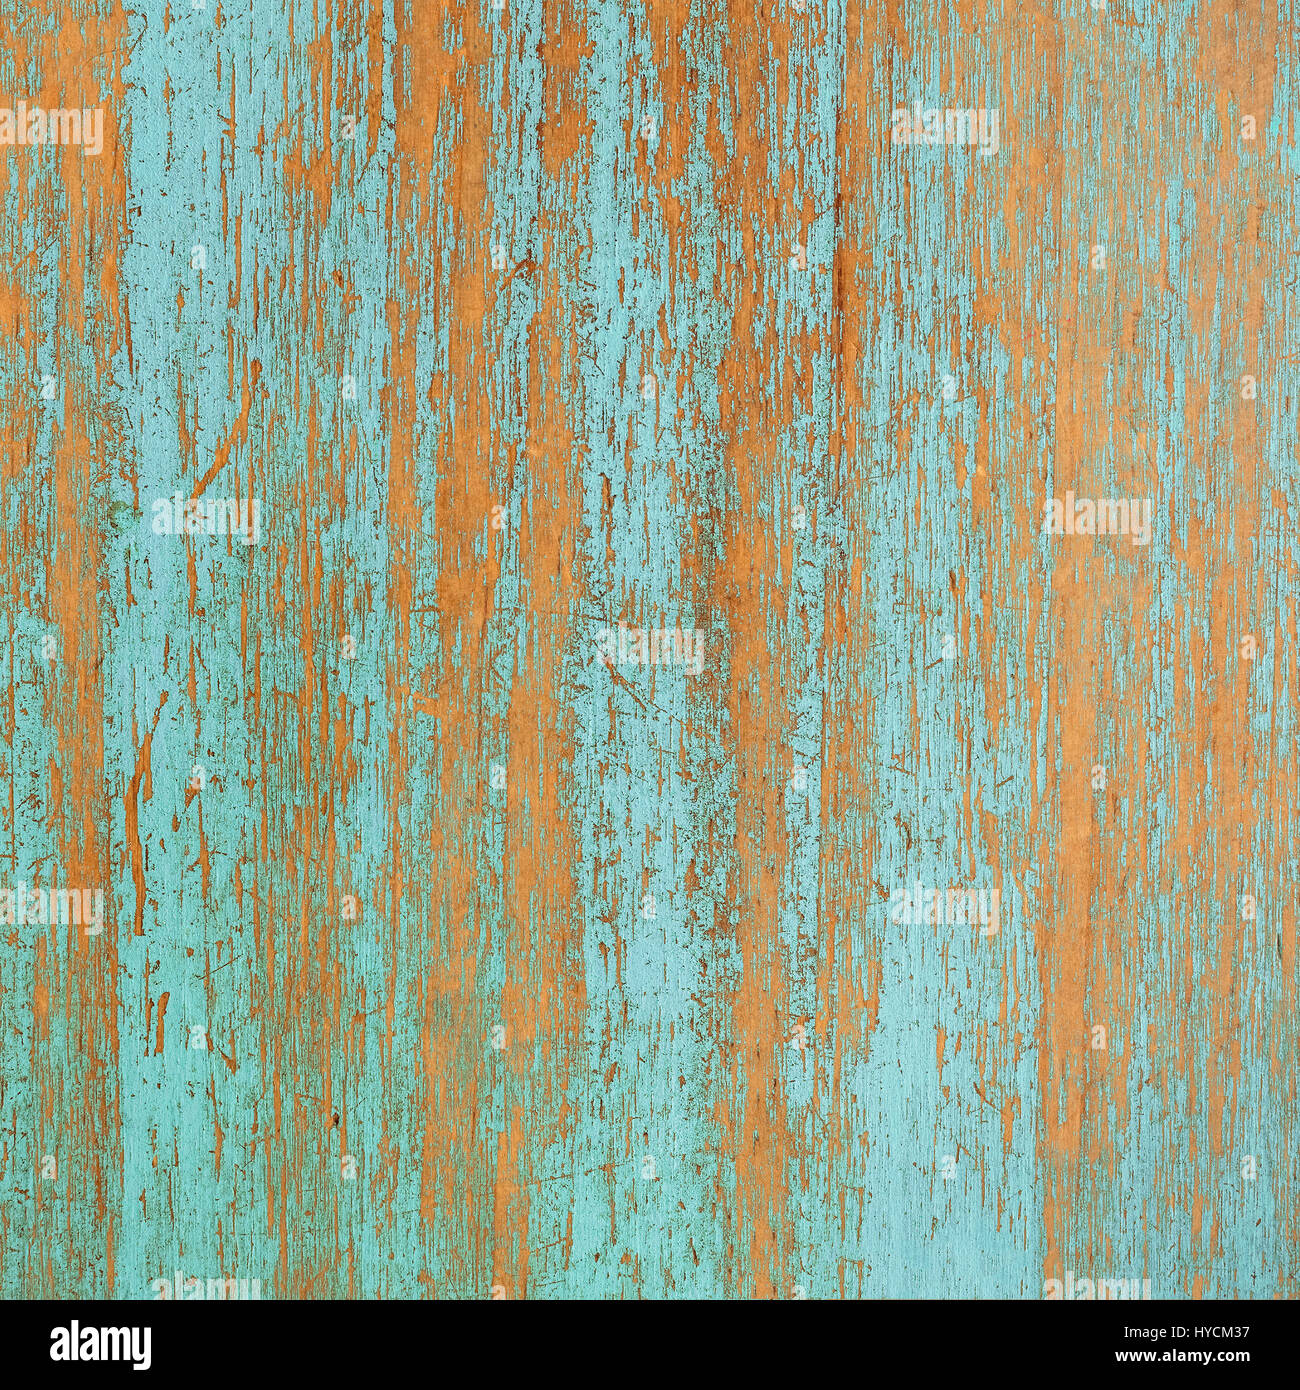 Teal and orange wooden boards background texture Stock Photo